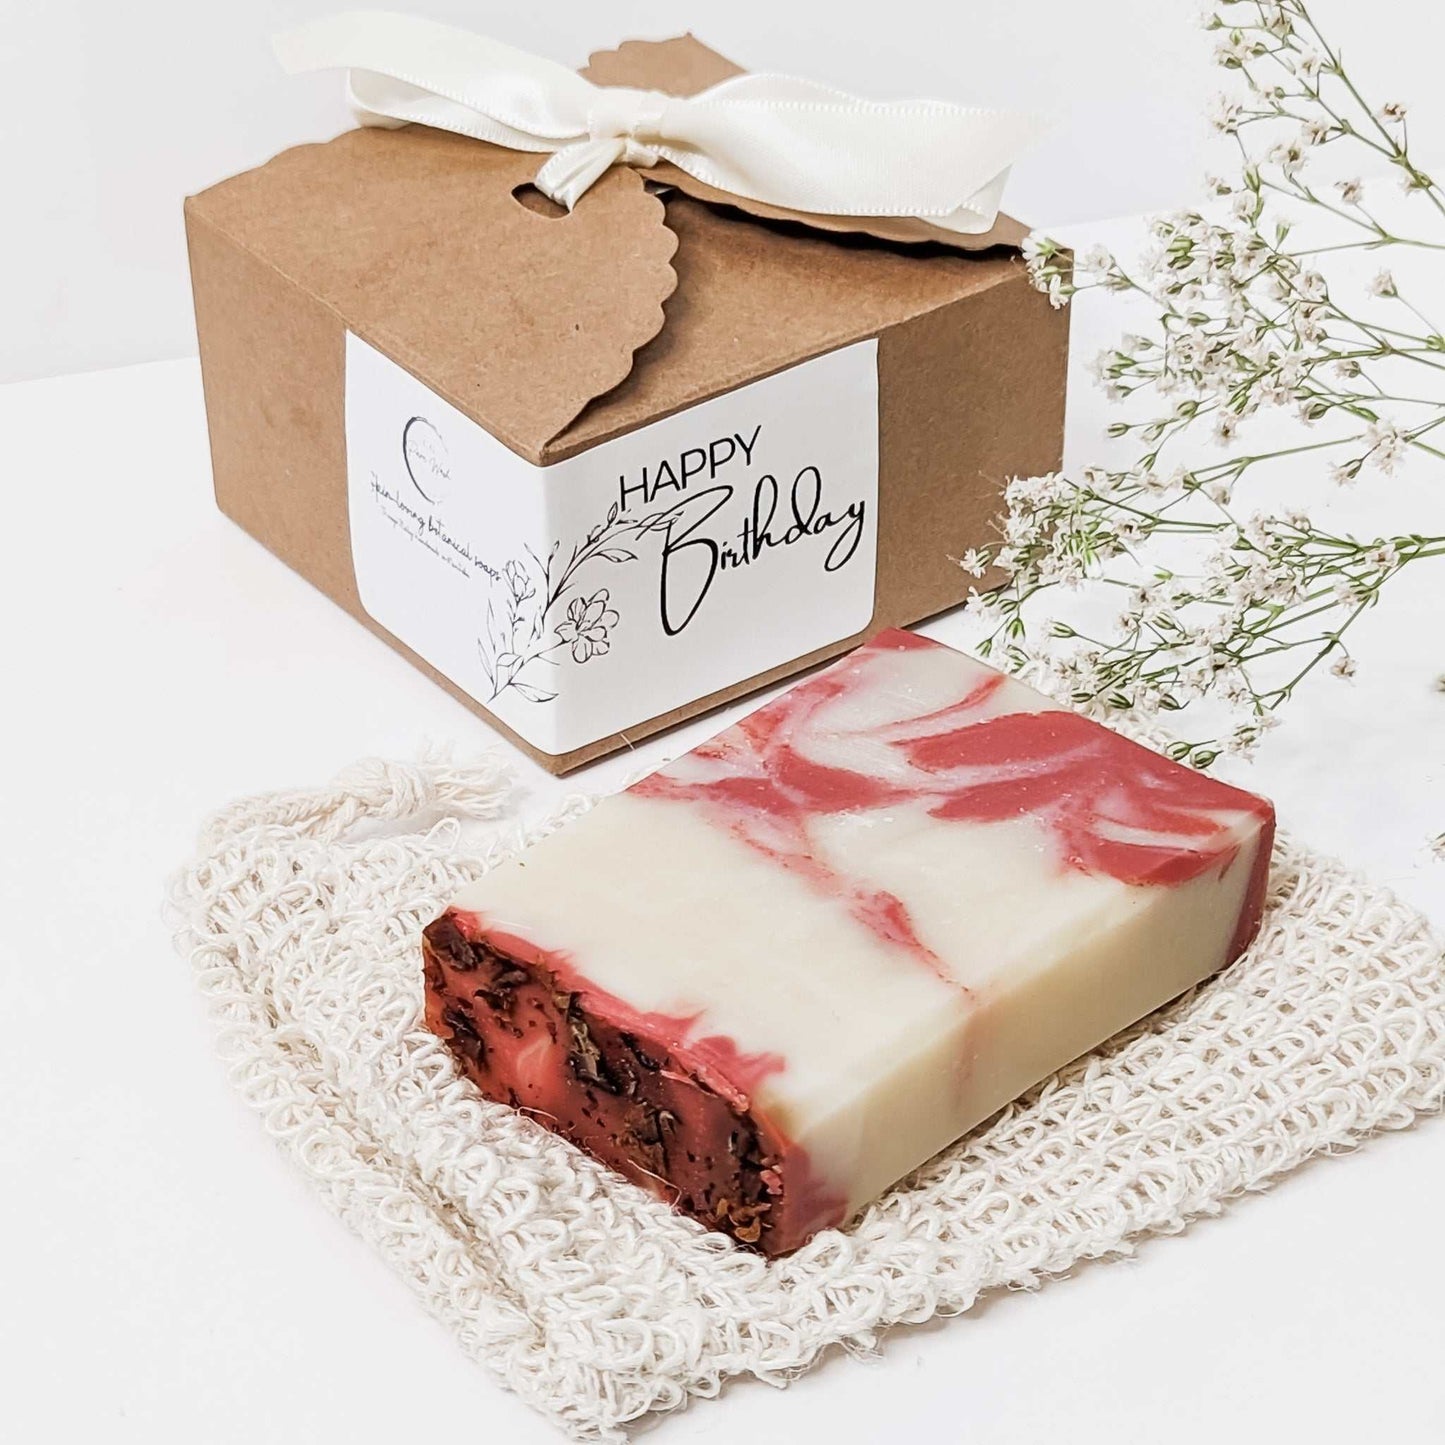 Handcrafted soap bar with swirls of red and white, paired with a rustic brown gift box featuring a 'Happy Birthday' tag, all set against a white backdrop with delicate white flowers.